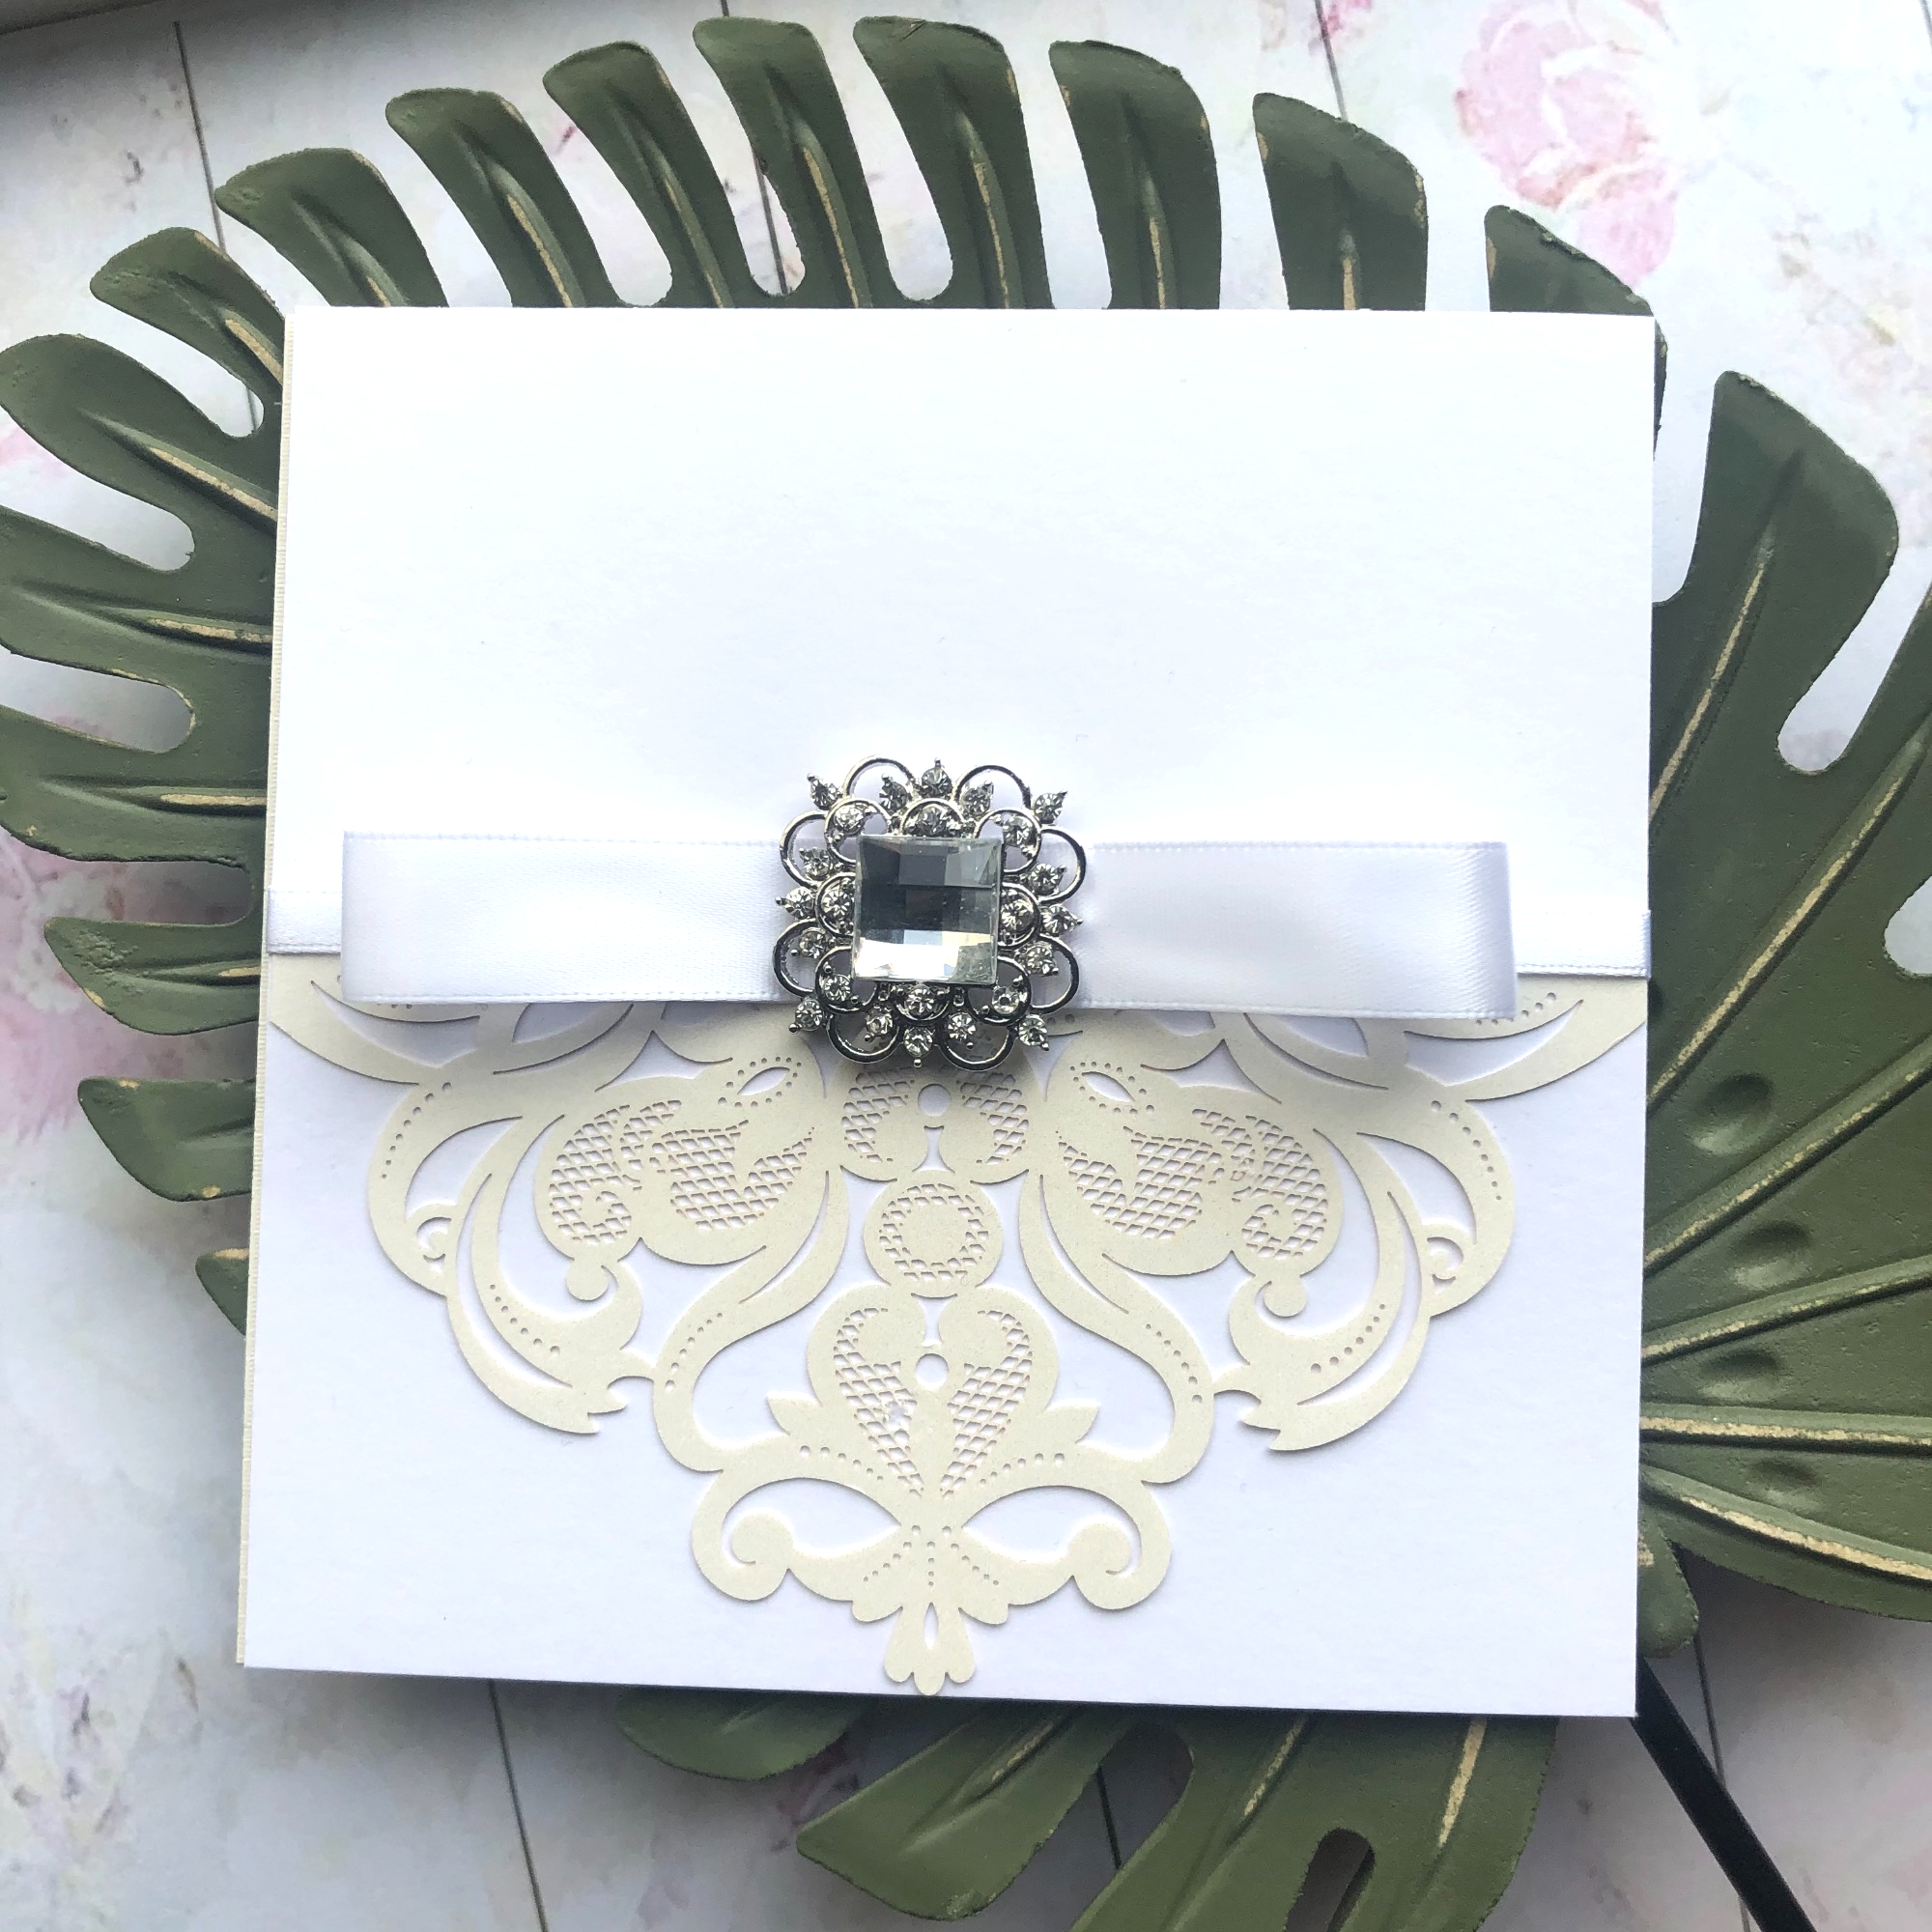 Vintage crystal invitation in white and ivory